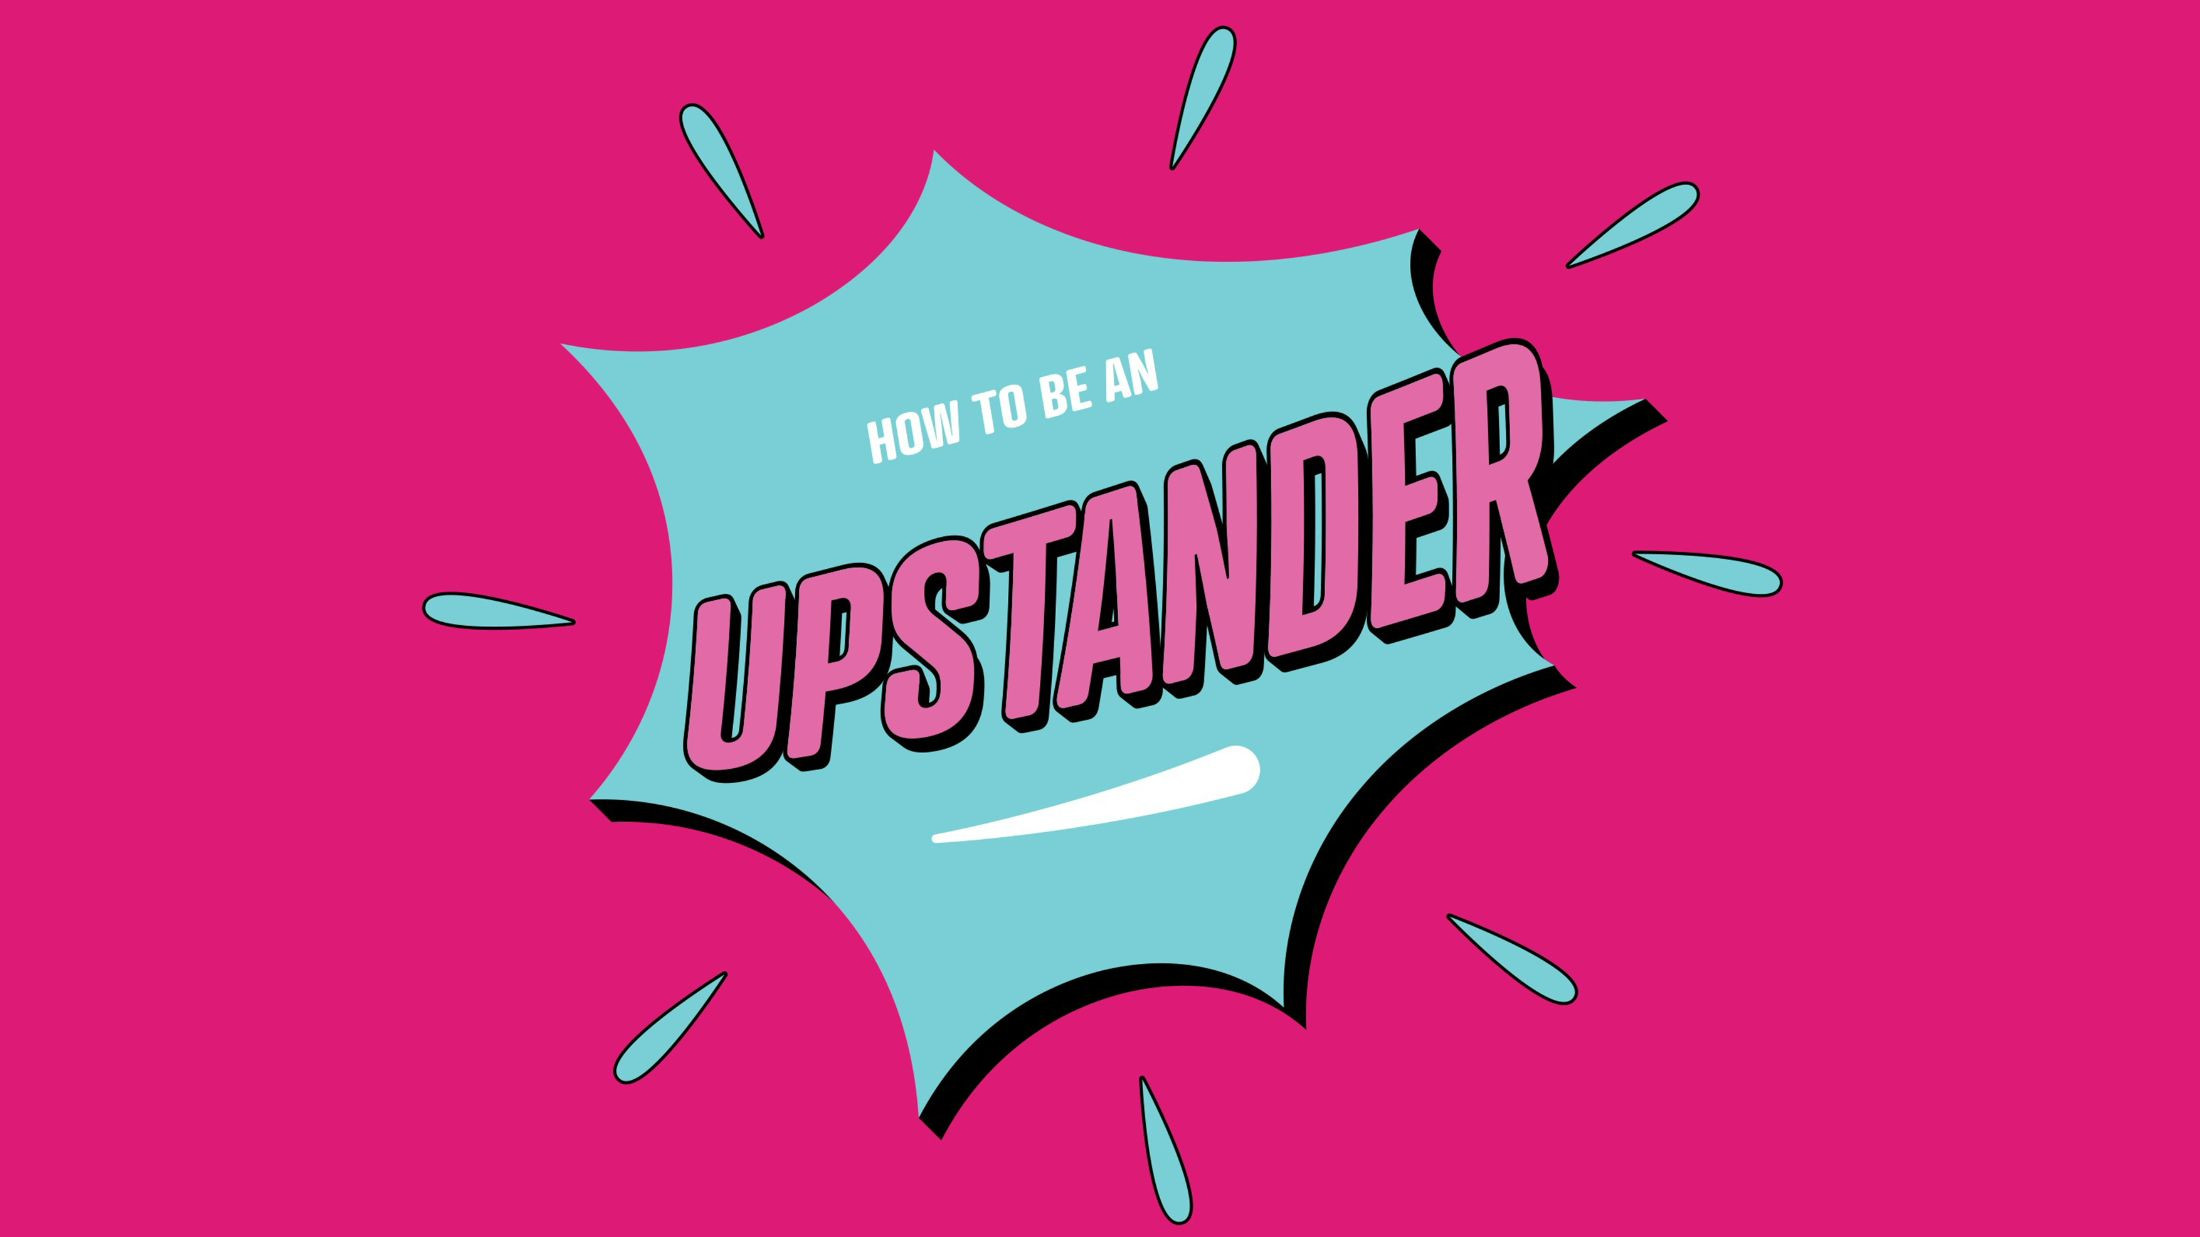 How to be an Upstander